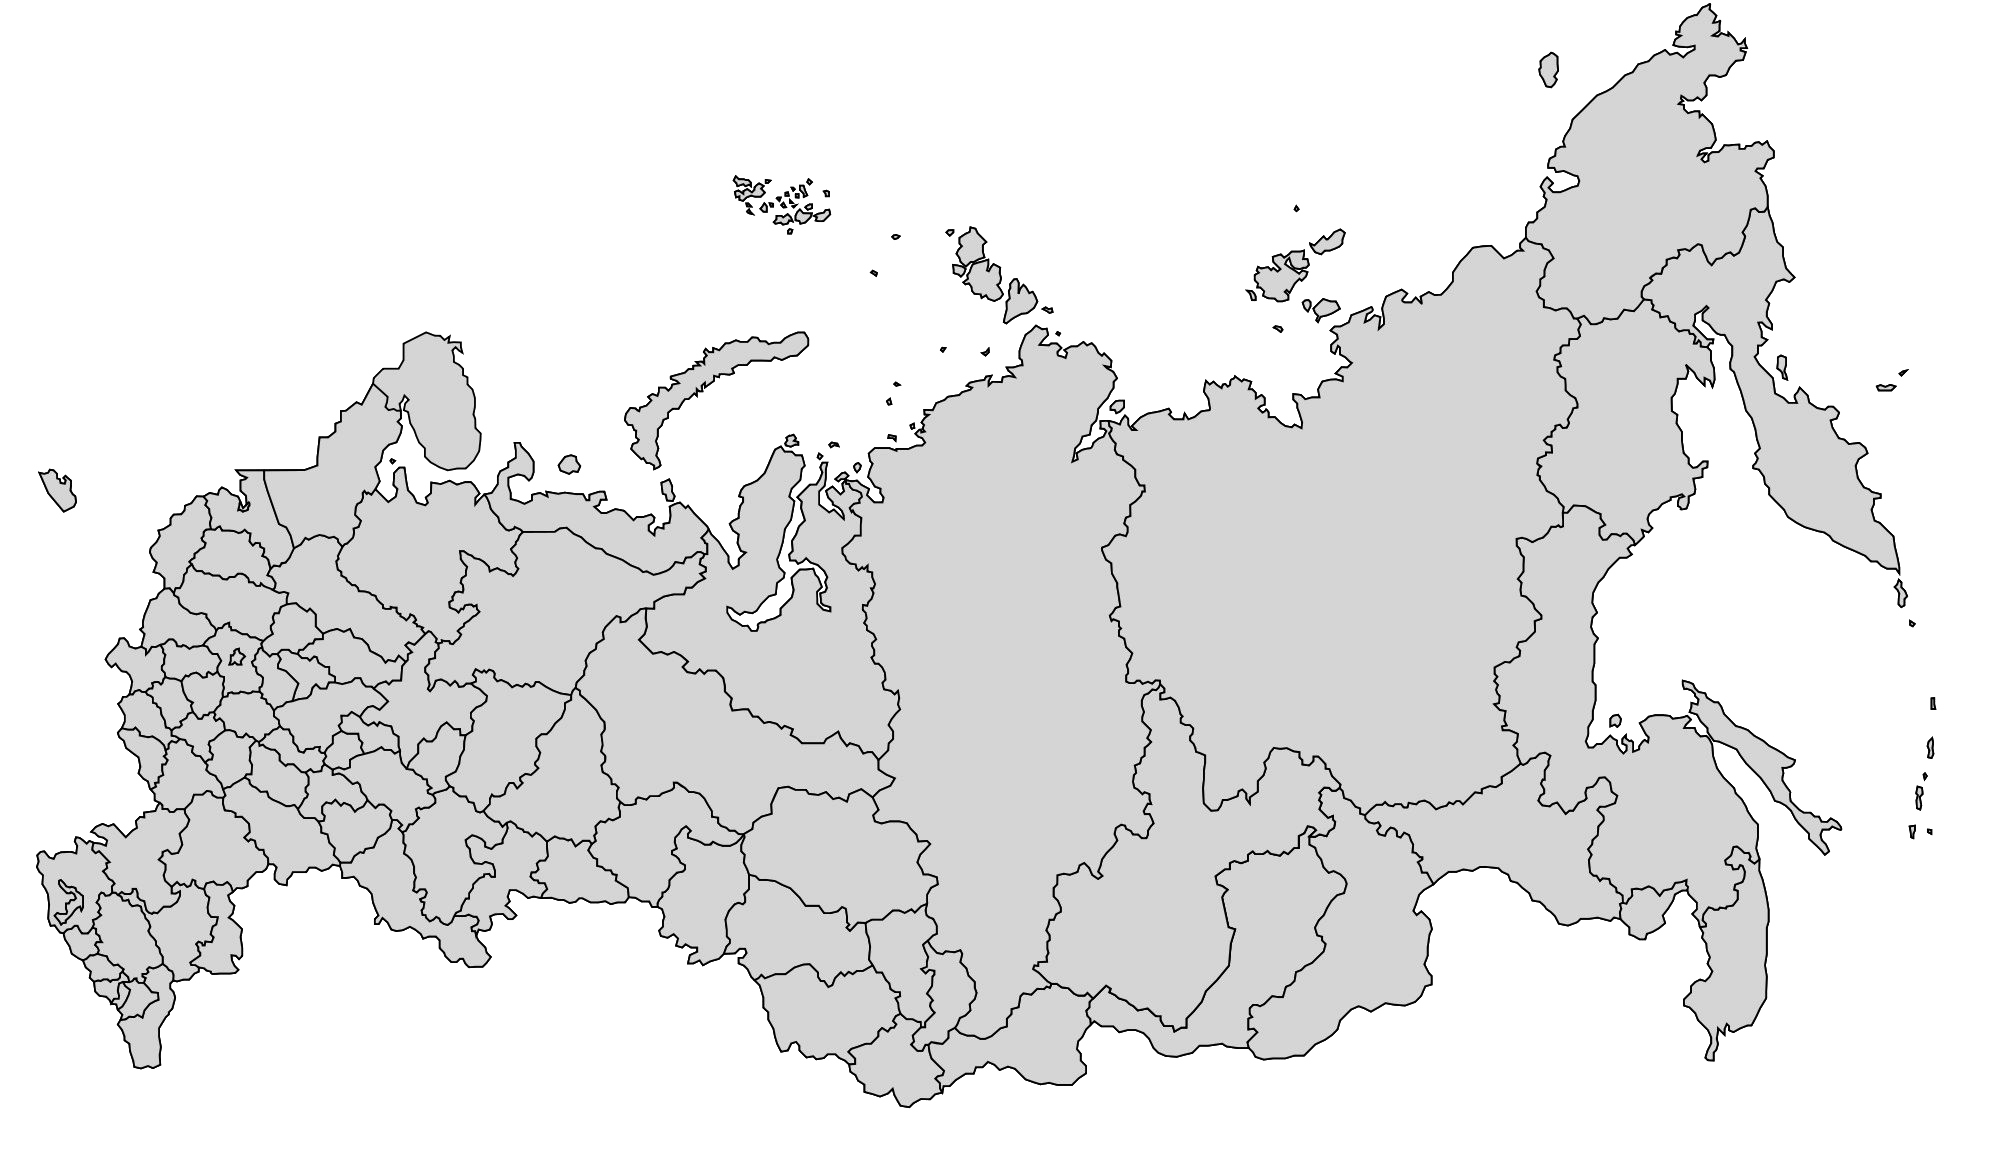 Russia Map PNG Transparent Image